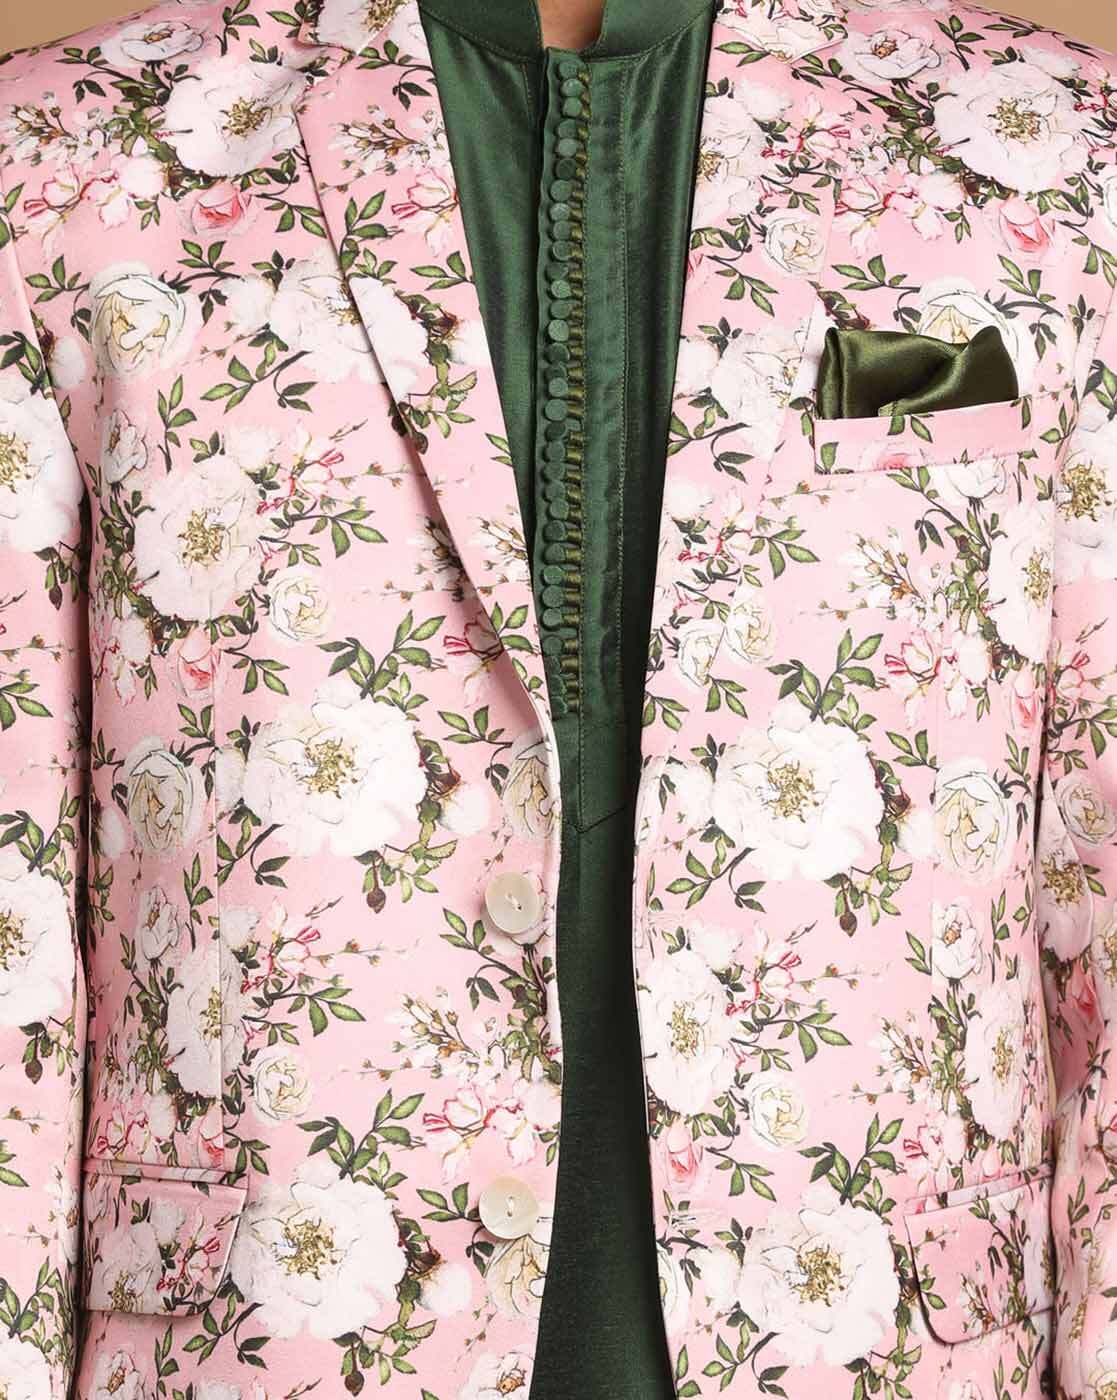 Bar III Men's Slim-Fit Floral-Print Suit Jacket, Created for Macy's - Macy's